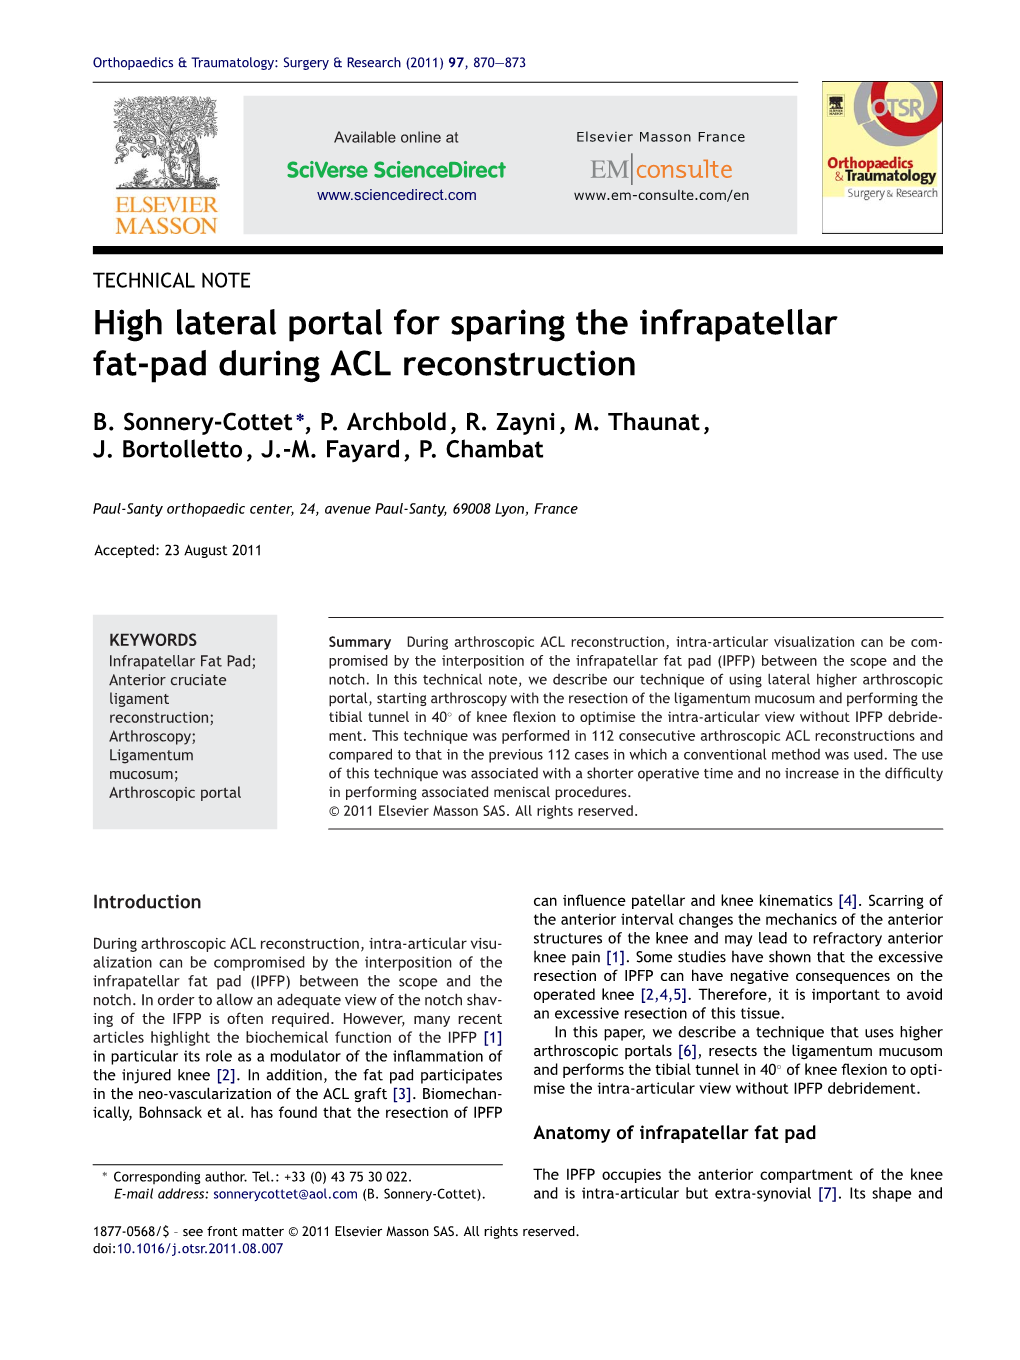 High Lateral Portal for Sparing the Infrapatellar Fat-Pad During ACL Reconstruction